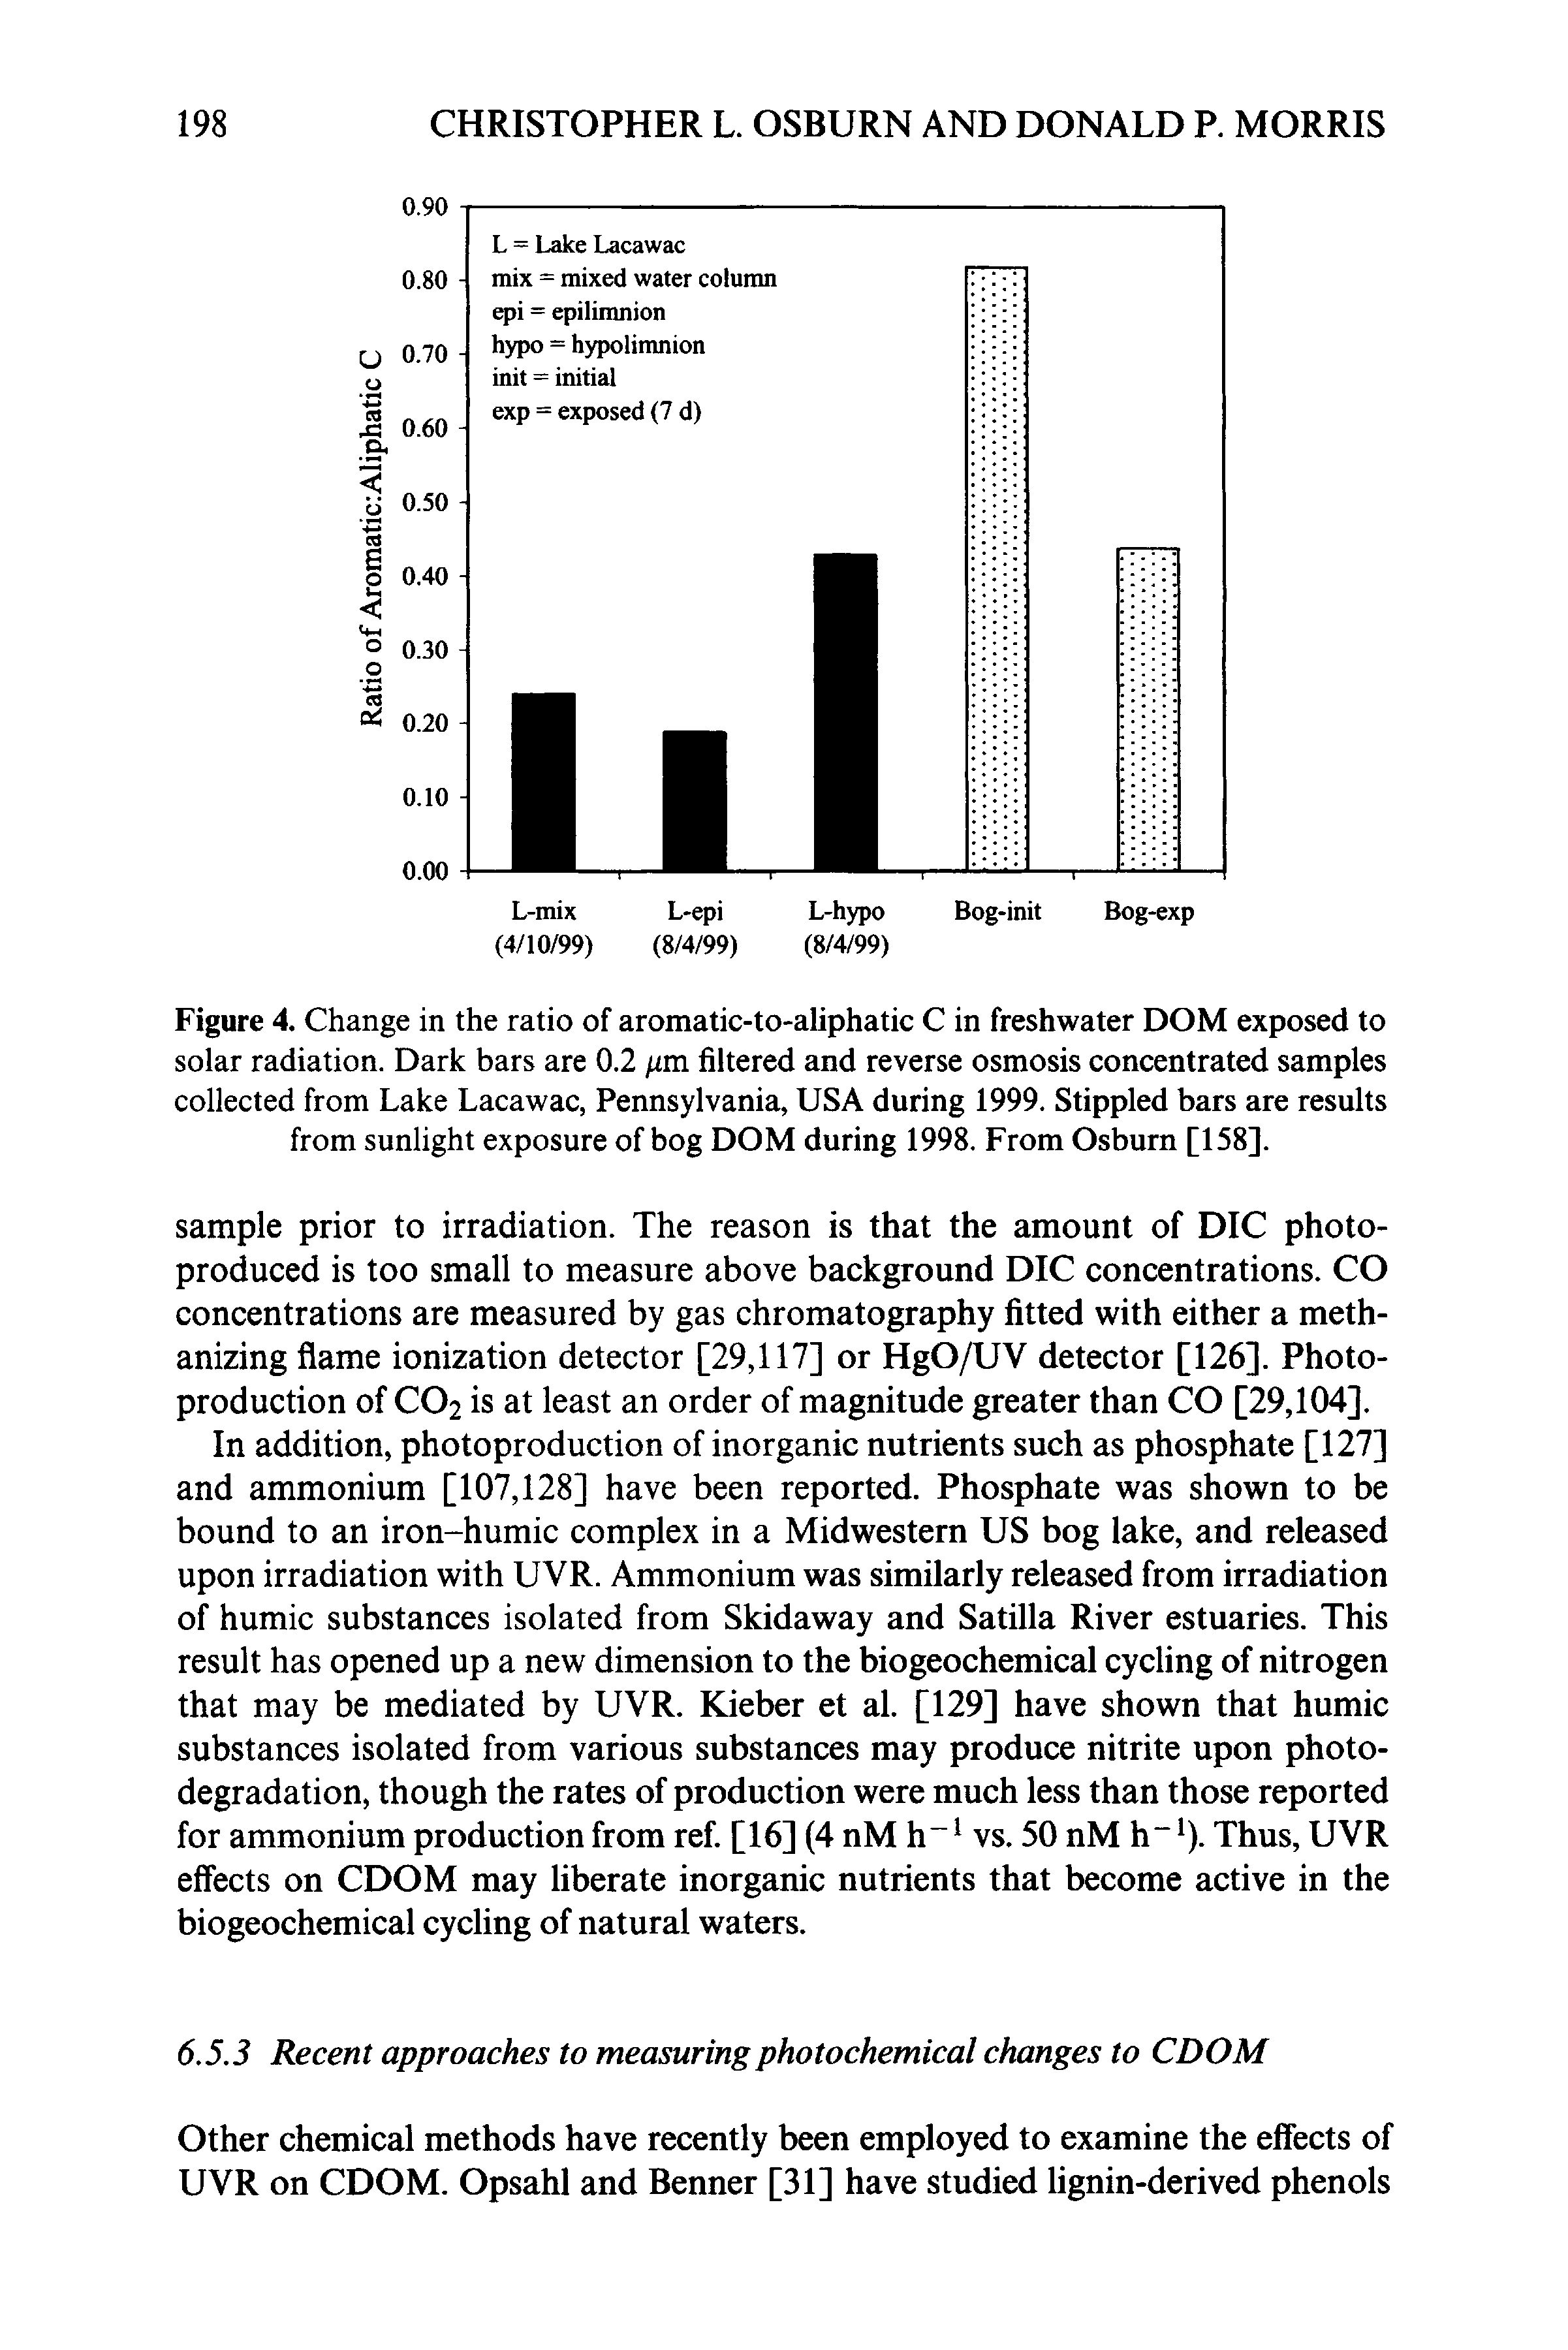 Figure 4. Change in the ratio of aromatic-to-aliphatic C in freshwater DOM exposed to solar radiation. Dark bars are 0.2 filtered and reverse osmosis concentrated samples collected from Lake Lacawac, Pennsylvania, USA during 1999. Stippled bars are results from sunlight exposure of bog DOM during 1998. From Osburn [158].